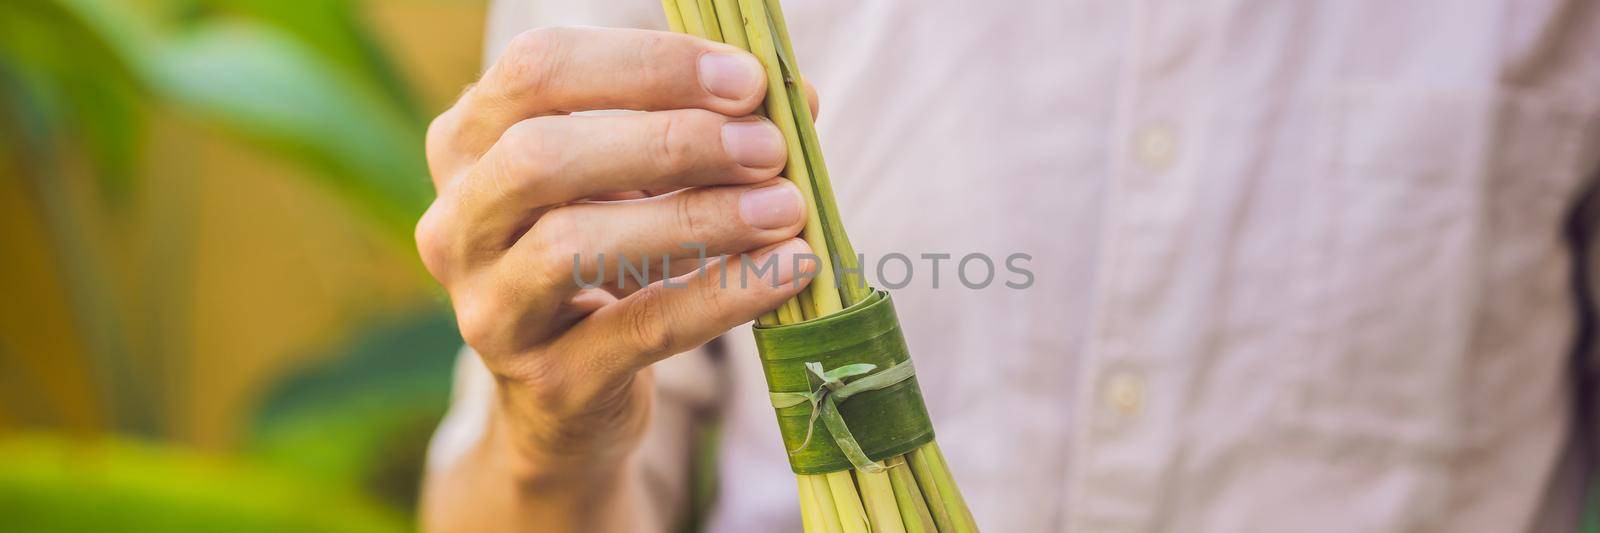 BANNER, LONG FORMAT Eco-friendly product packaging concept. Lemongrass wrapped in a banana leaf, as an alternative to a plastic bag. Zero waste concept. Alternative packaging.